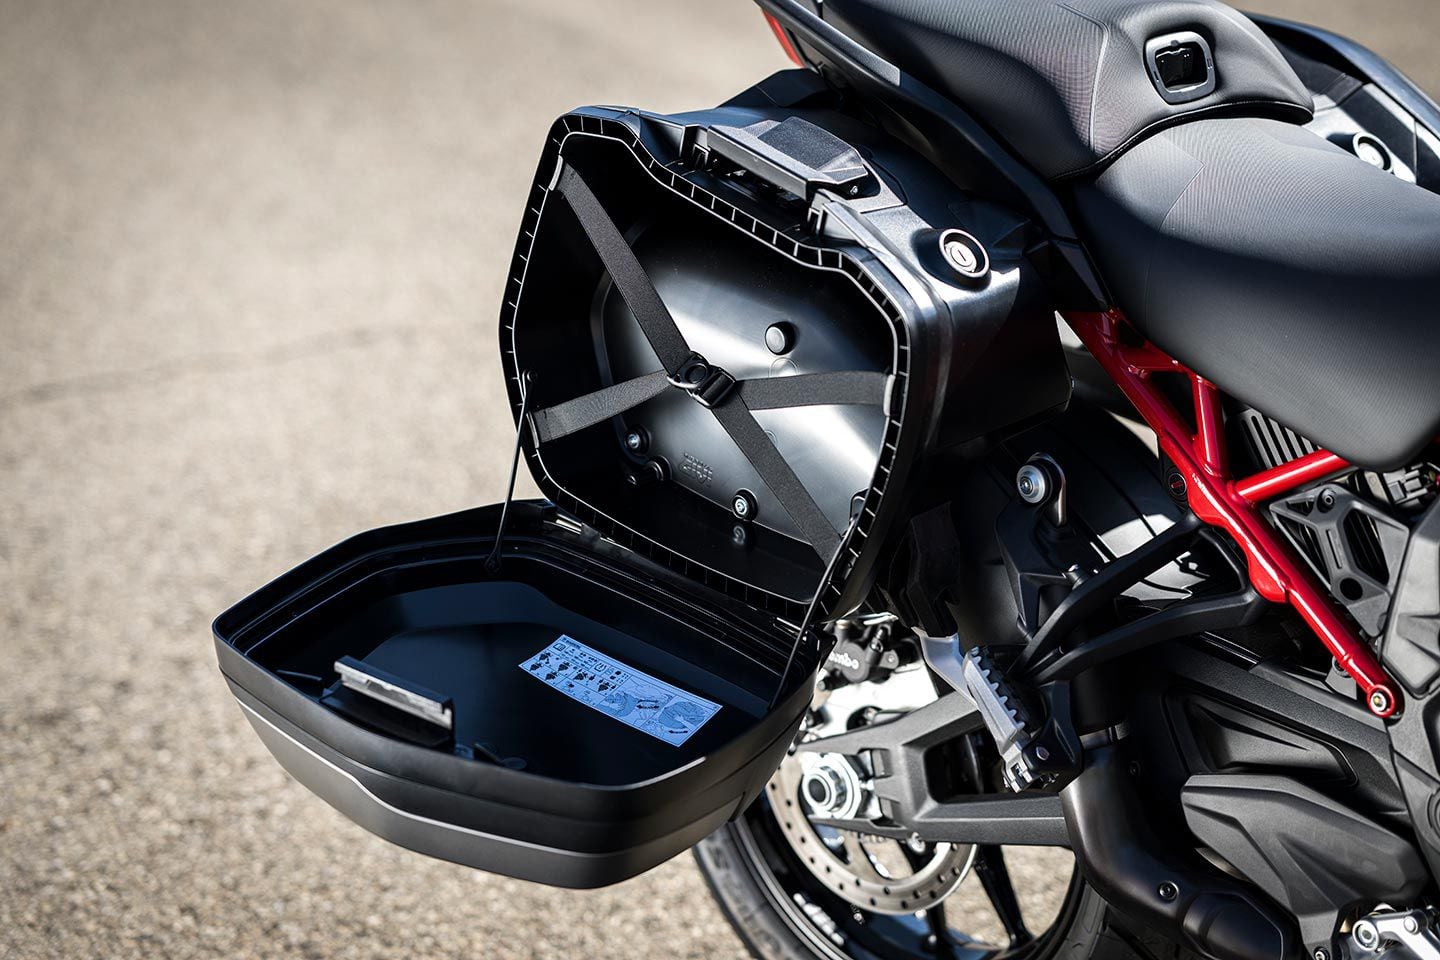 Capacity for the two plastic side cases on the Multistrada V4 S Grand Tour is a combined 60 liters.